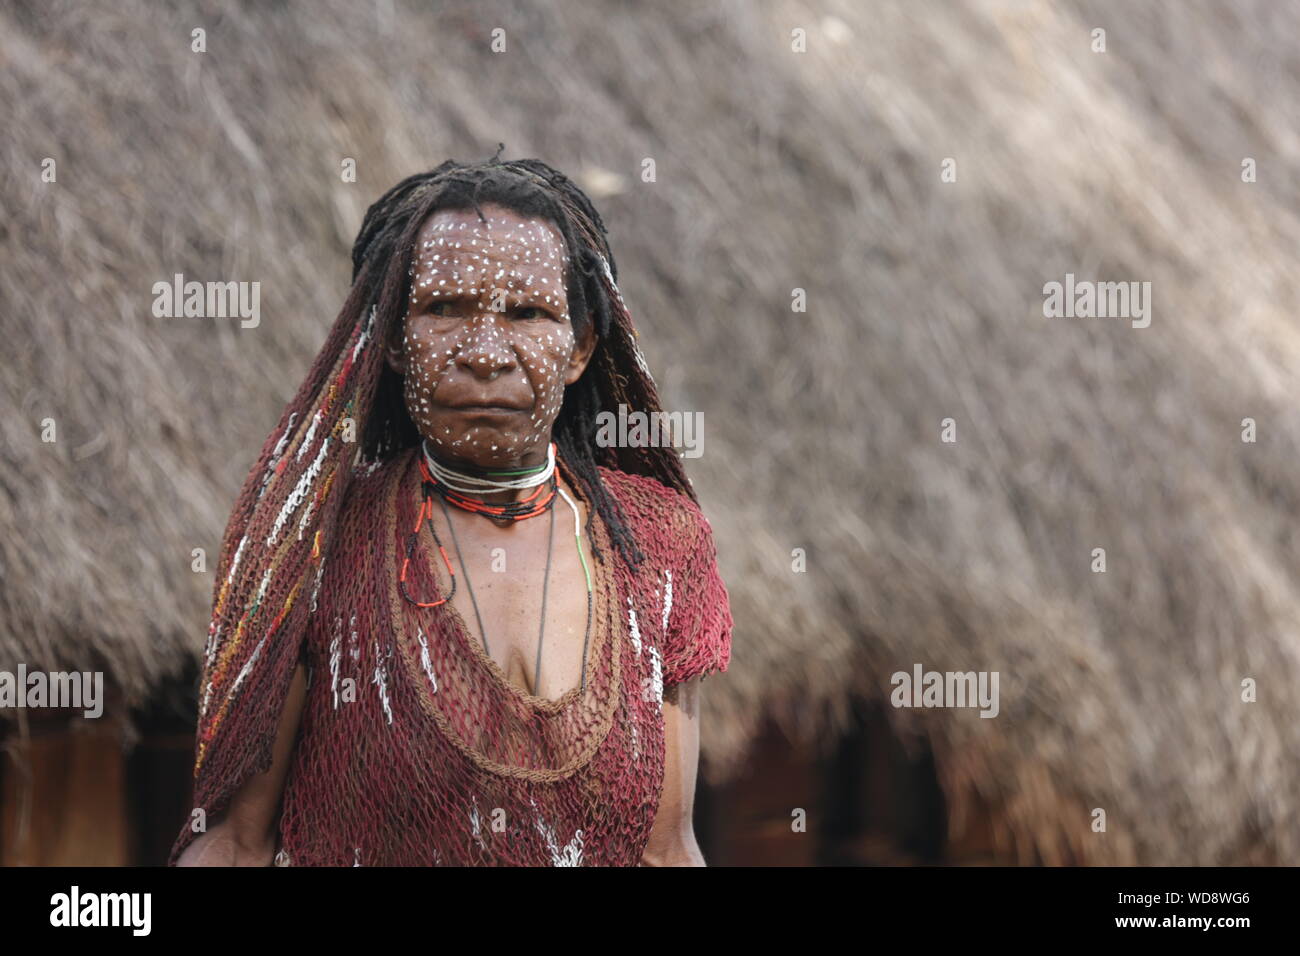 Woman With Face Paint And Dreadlocks Stock Photo